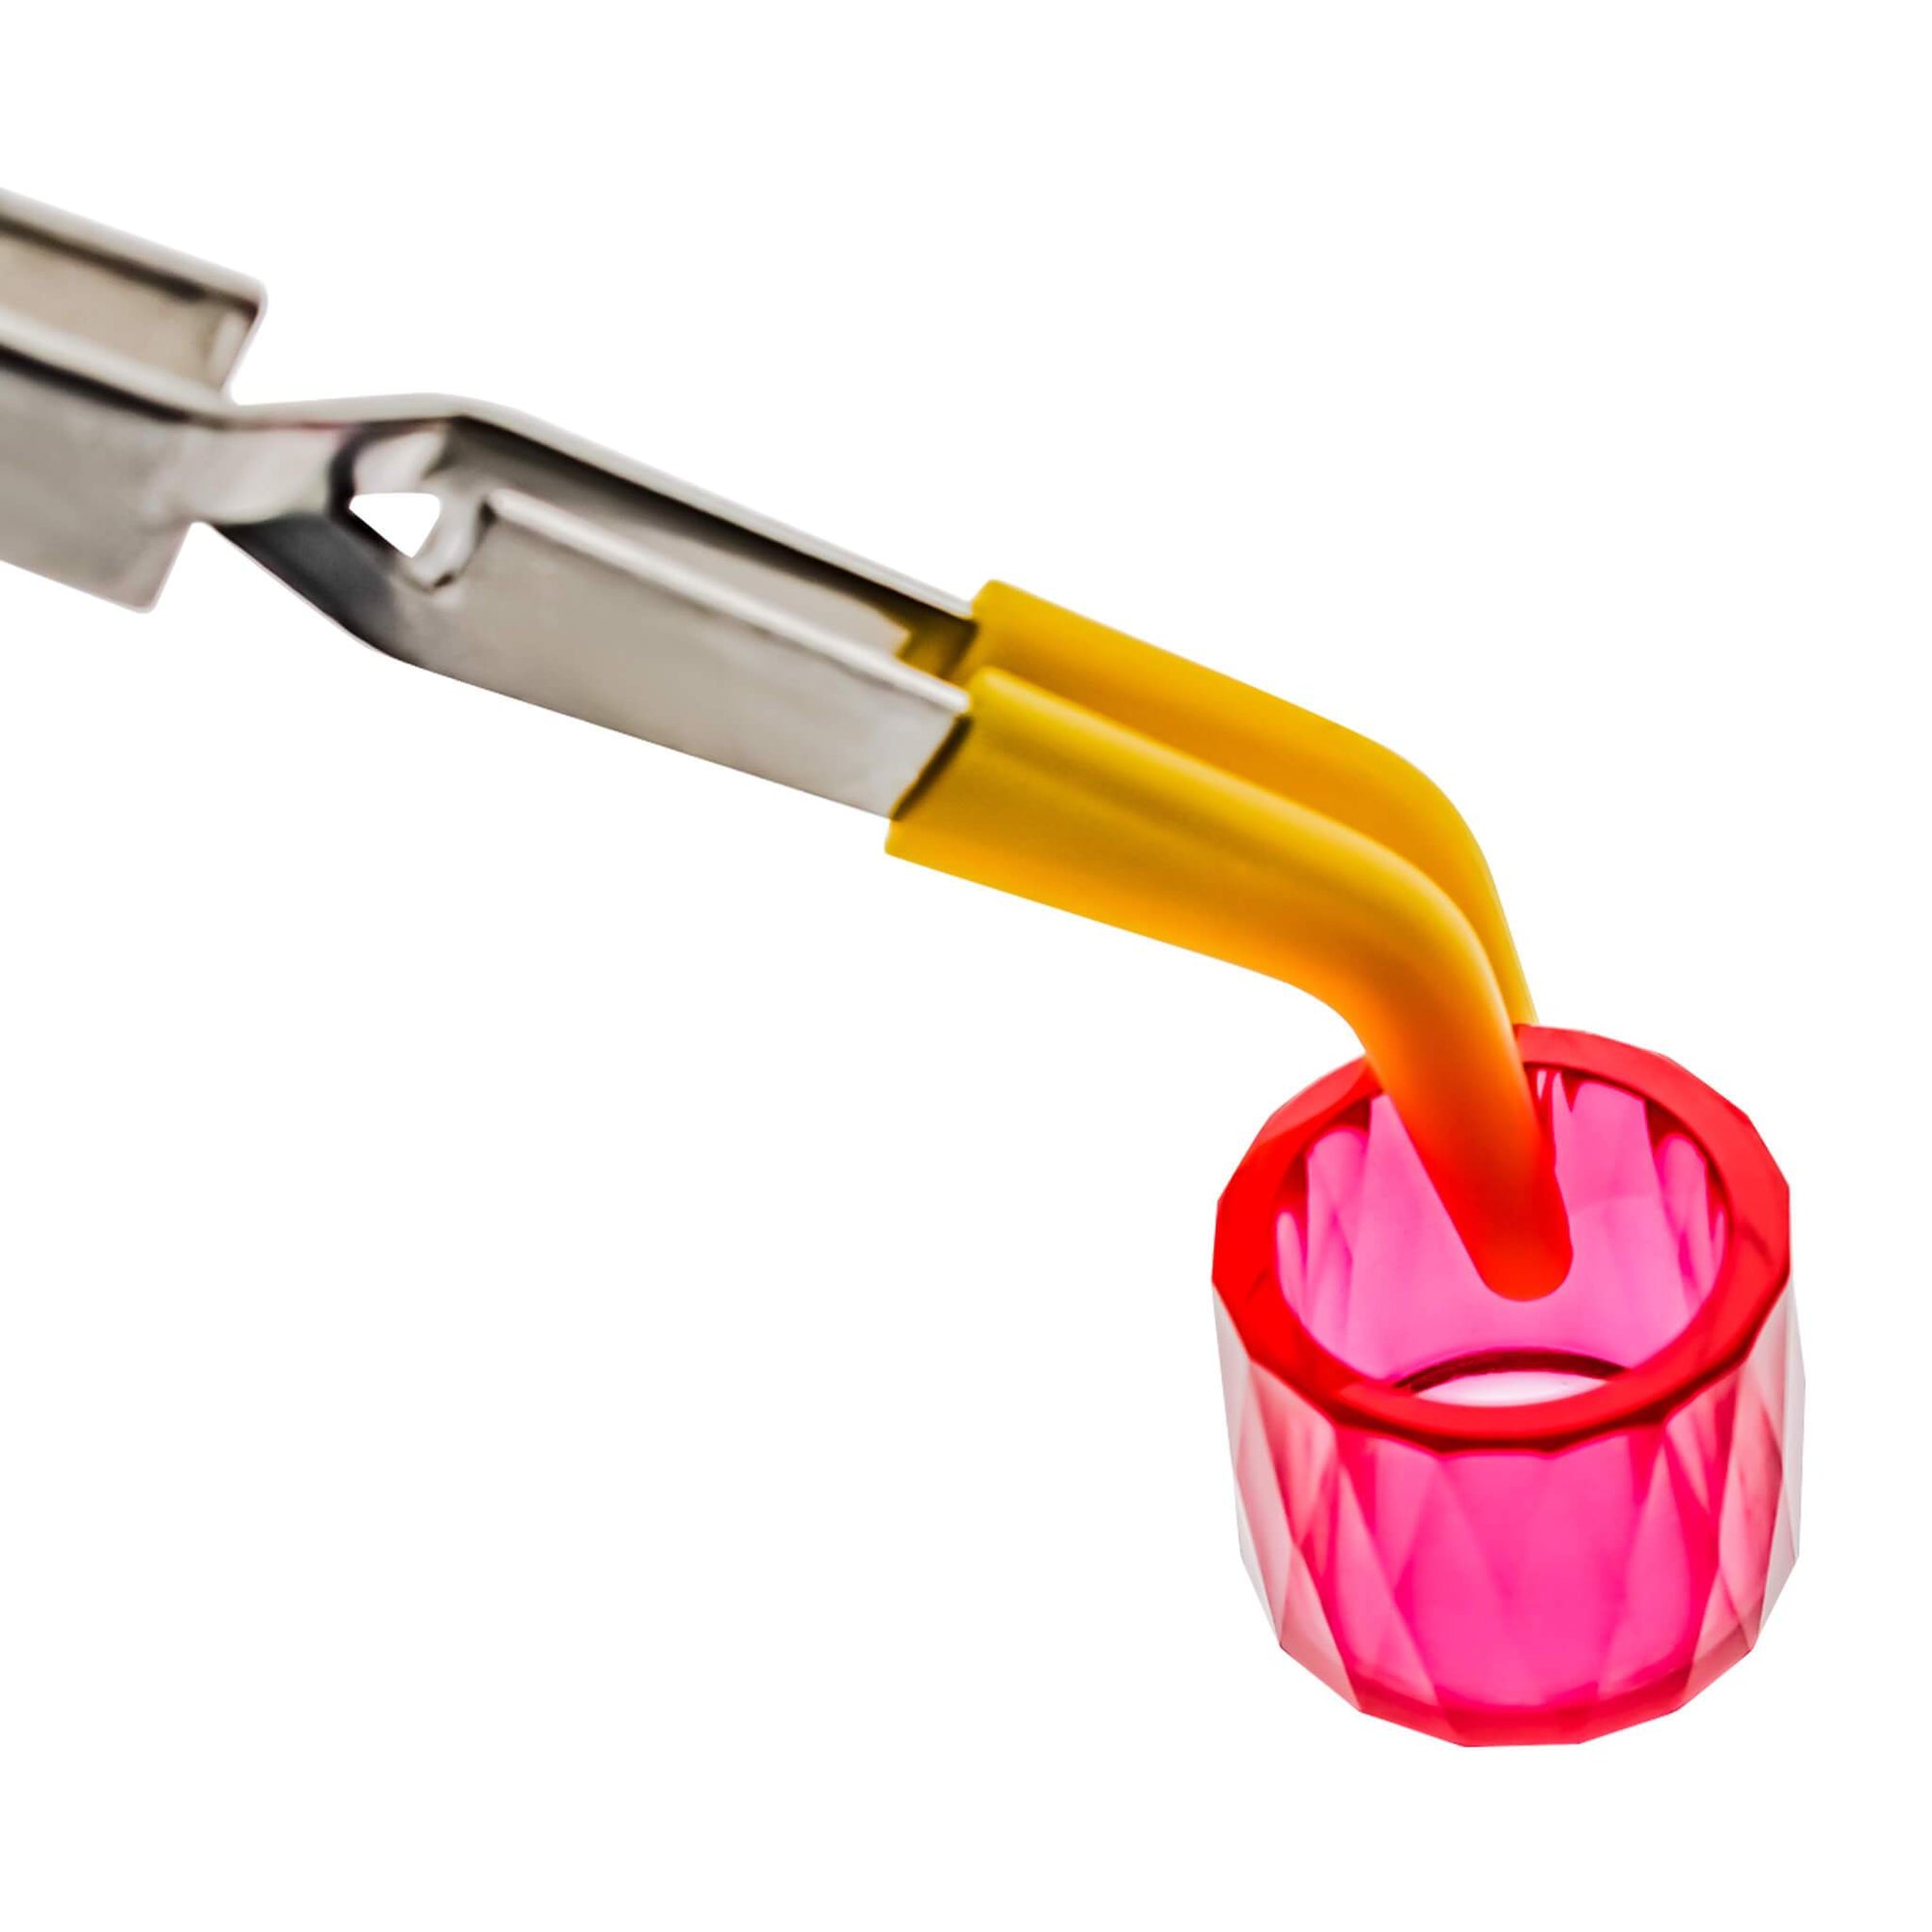 25mm Faceted Ruby Insert Cup | Tweezer Grab View | the dabbing specialists